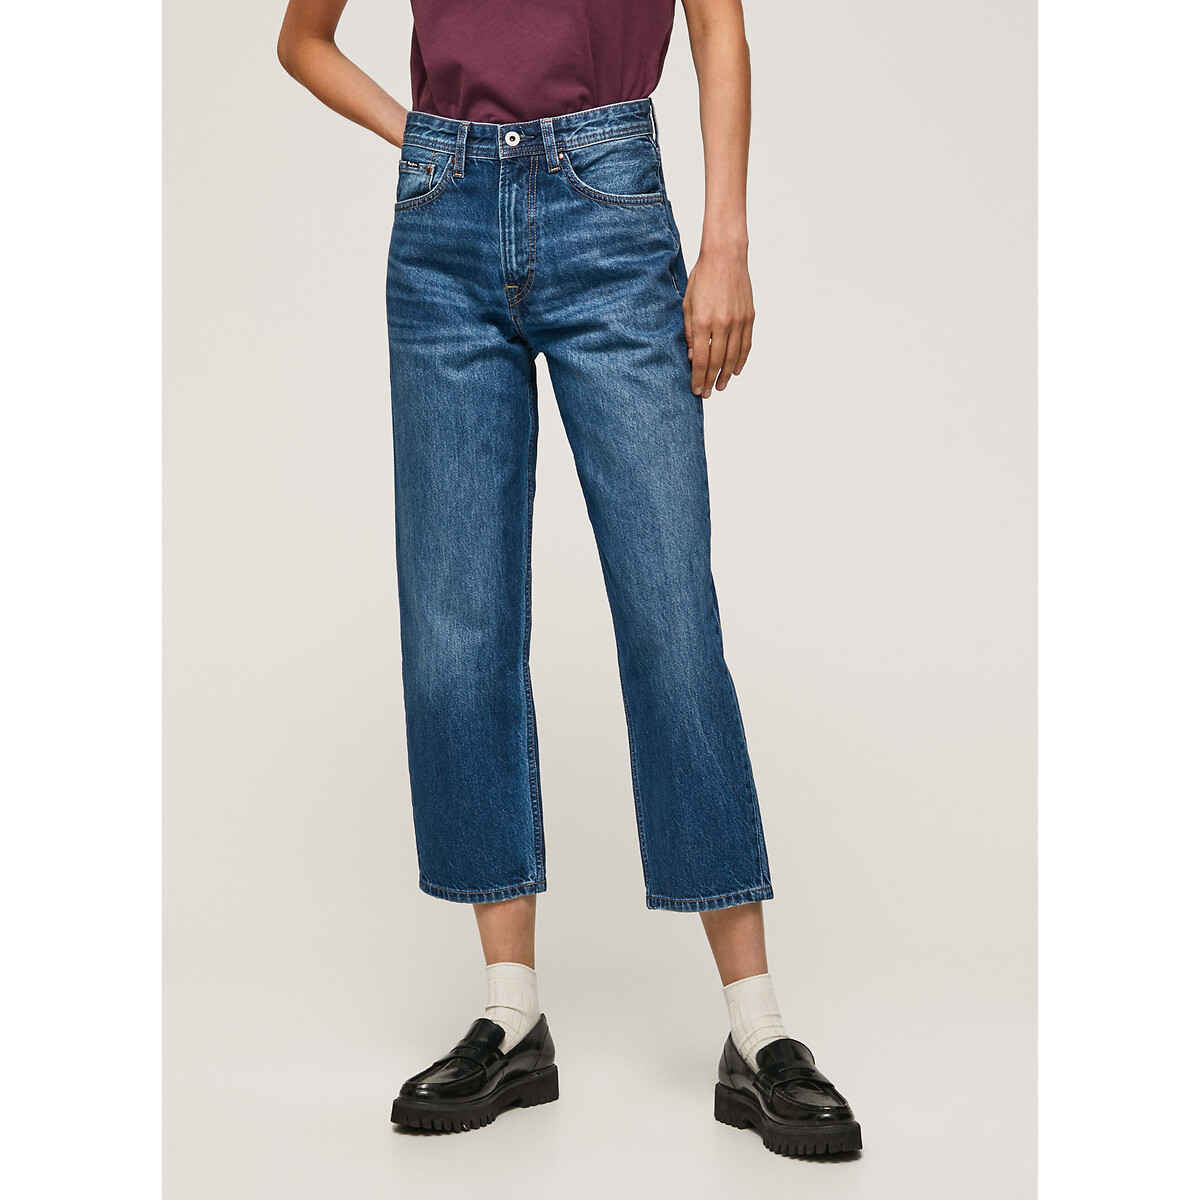 Flares PEPE JEANS W25 Women Clothing Pepe Jeans Women Jeans Pepe Jeans Women Boot-cut Jeans T 34 Flares Pepe Jeans Women Boot-cut Jeans Flares Pepe Jeans Women blue Boot-cut Jeans 